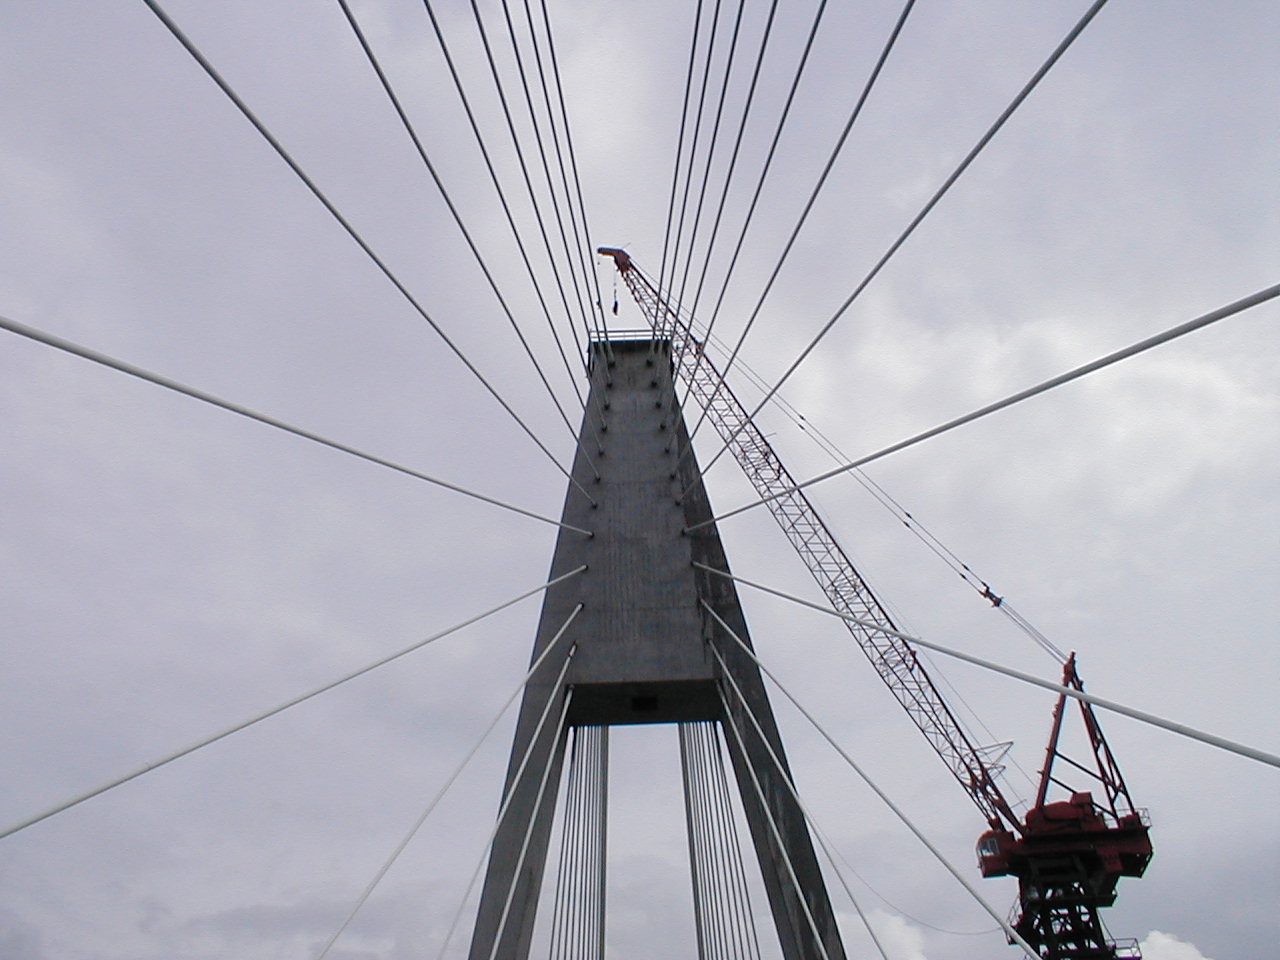 Cables connecting to the top of the south tower.